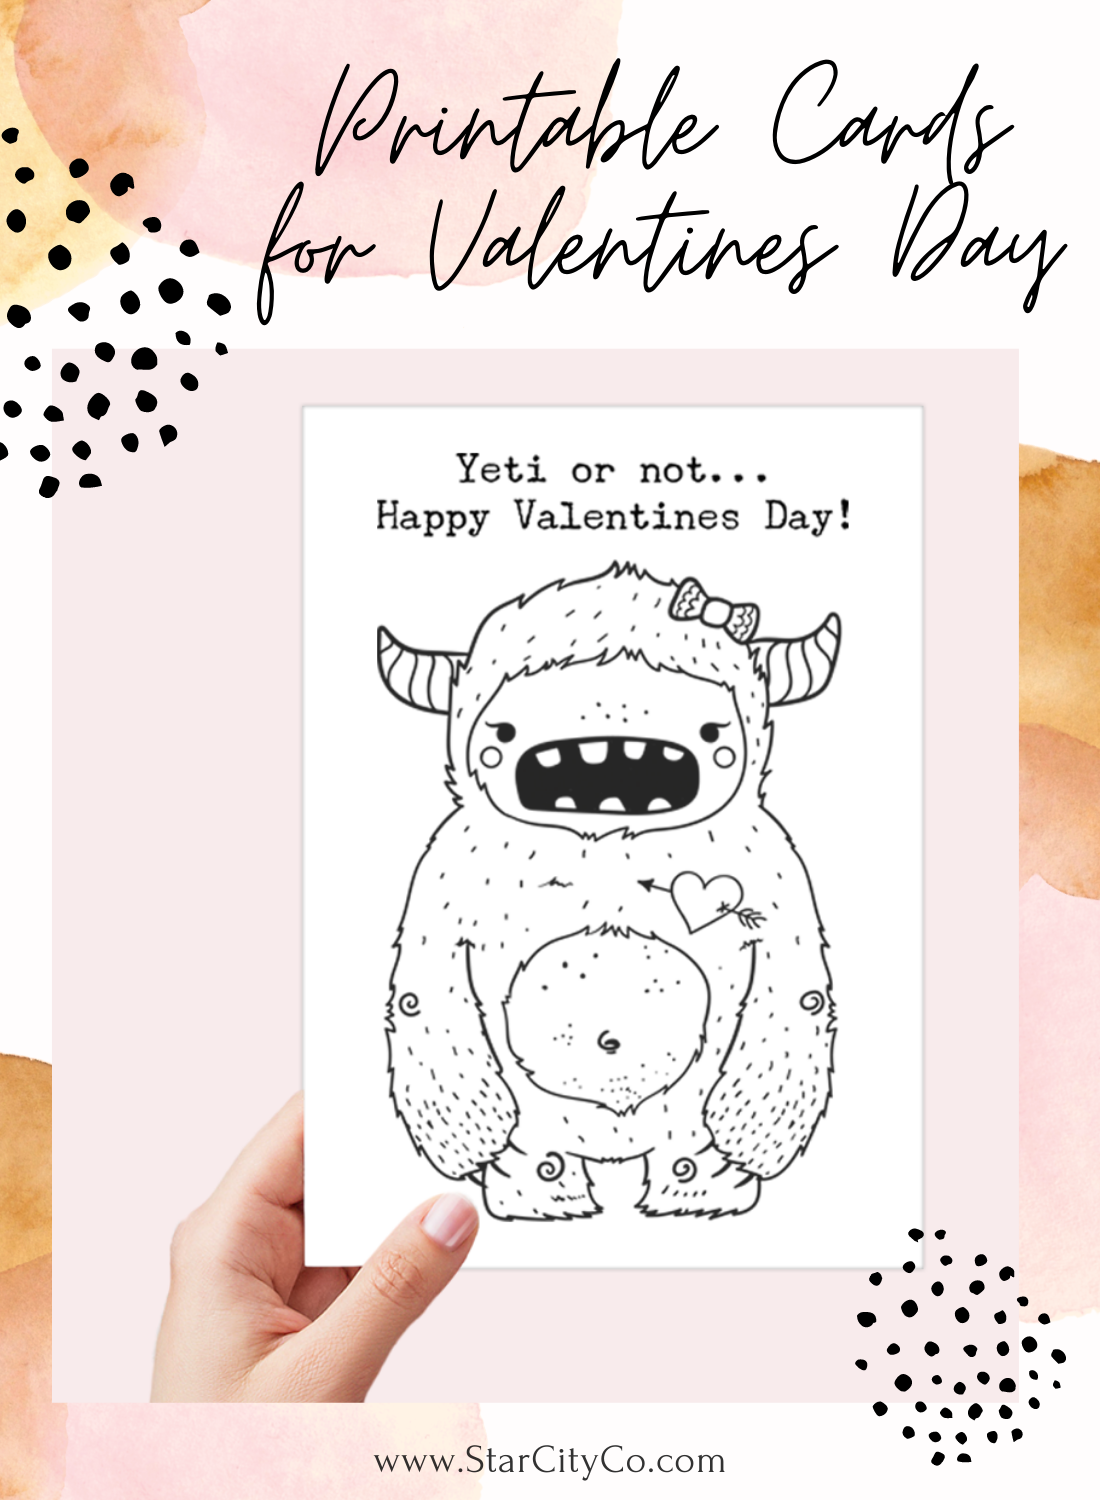 Yeti or Not Happy Valentines Day Coloring Greeting Card Printable - Digital Download